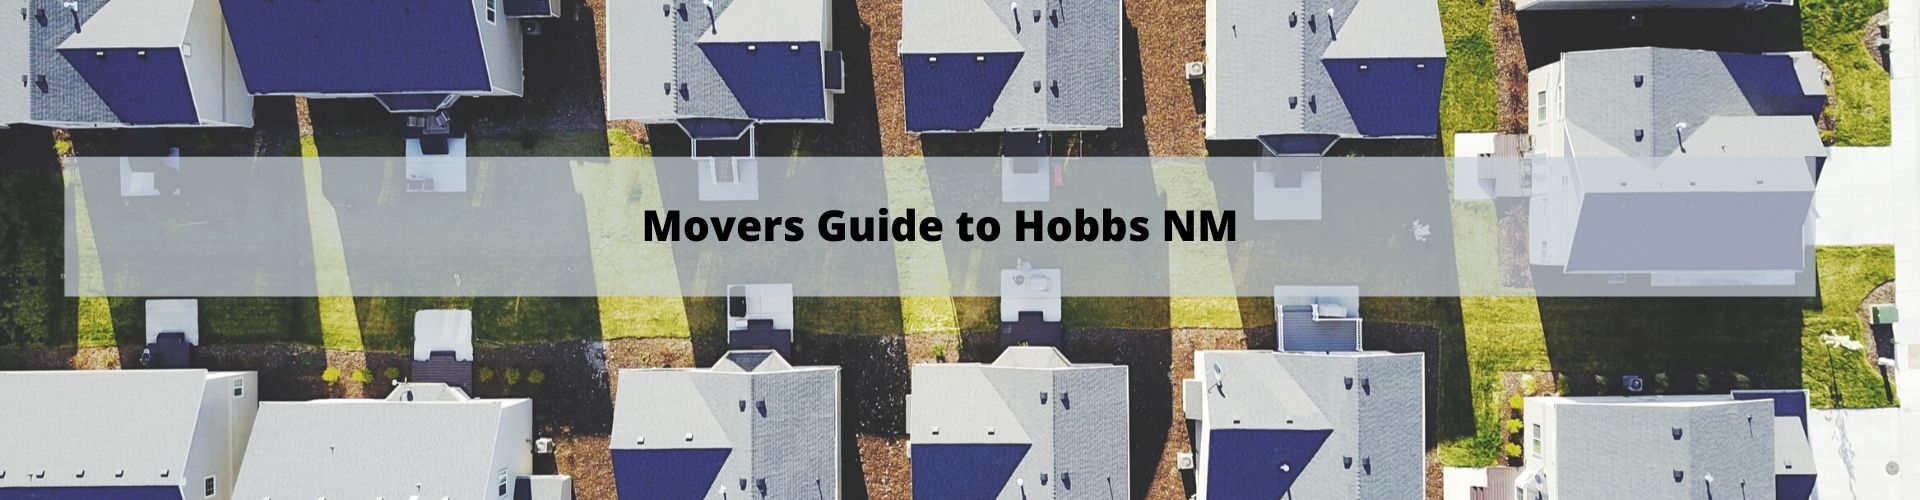 Hobbs NM movers guide